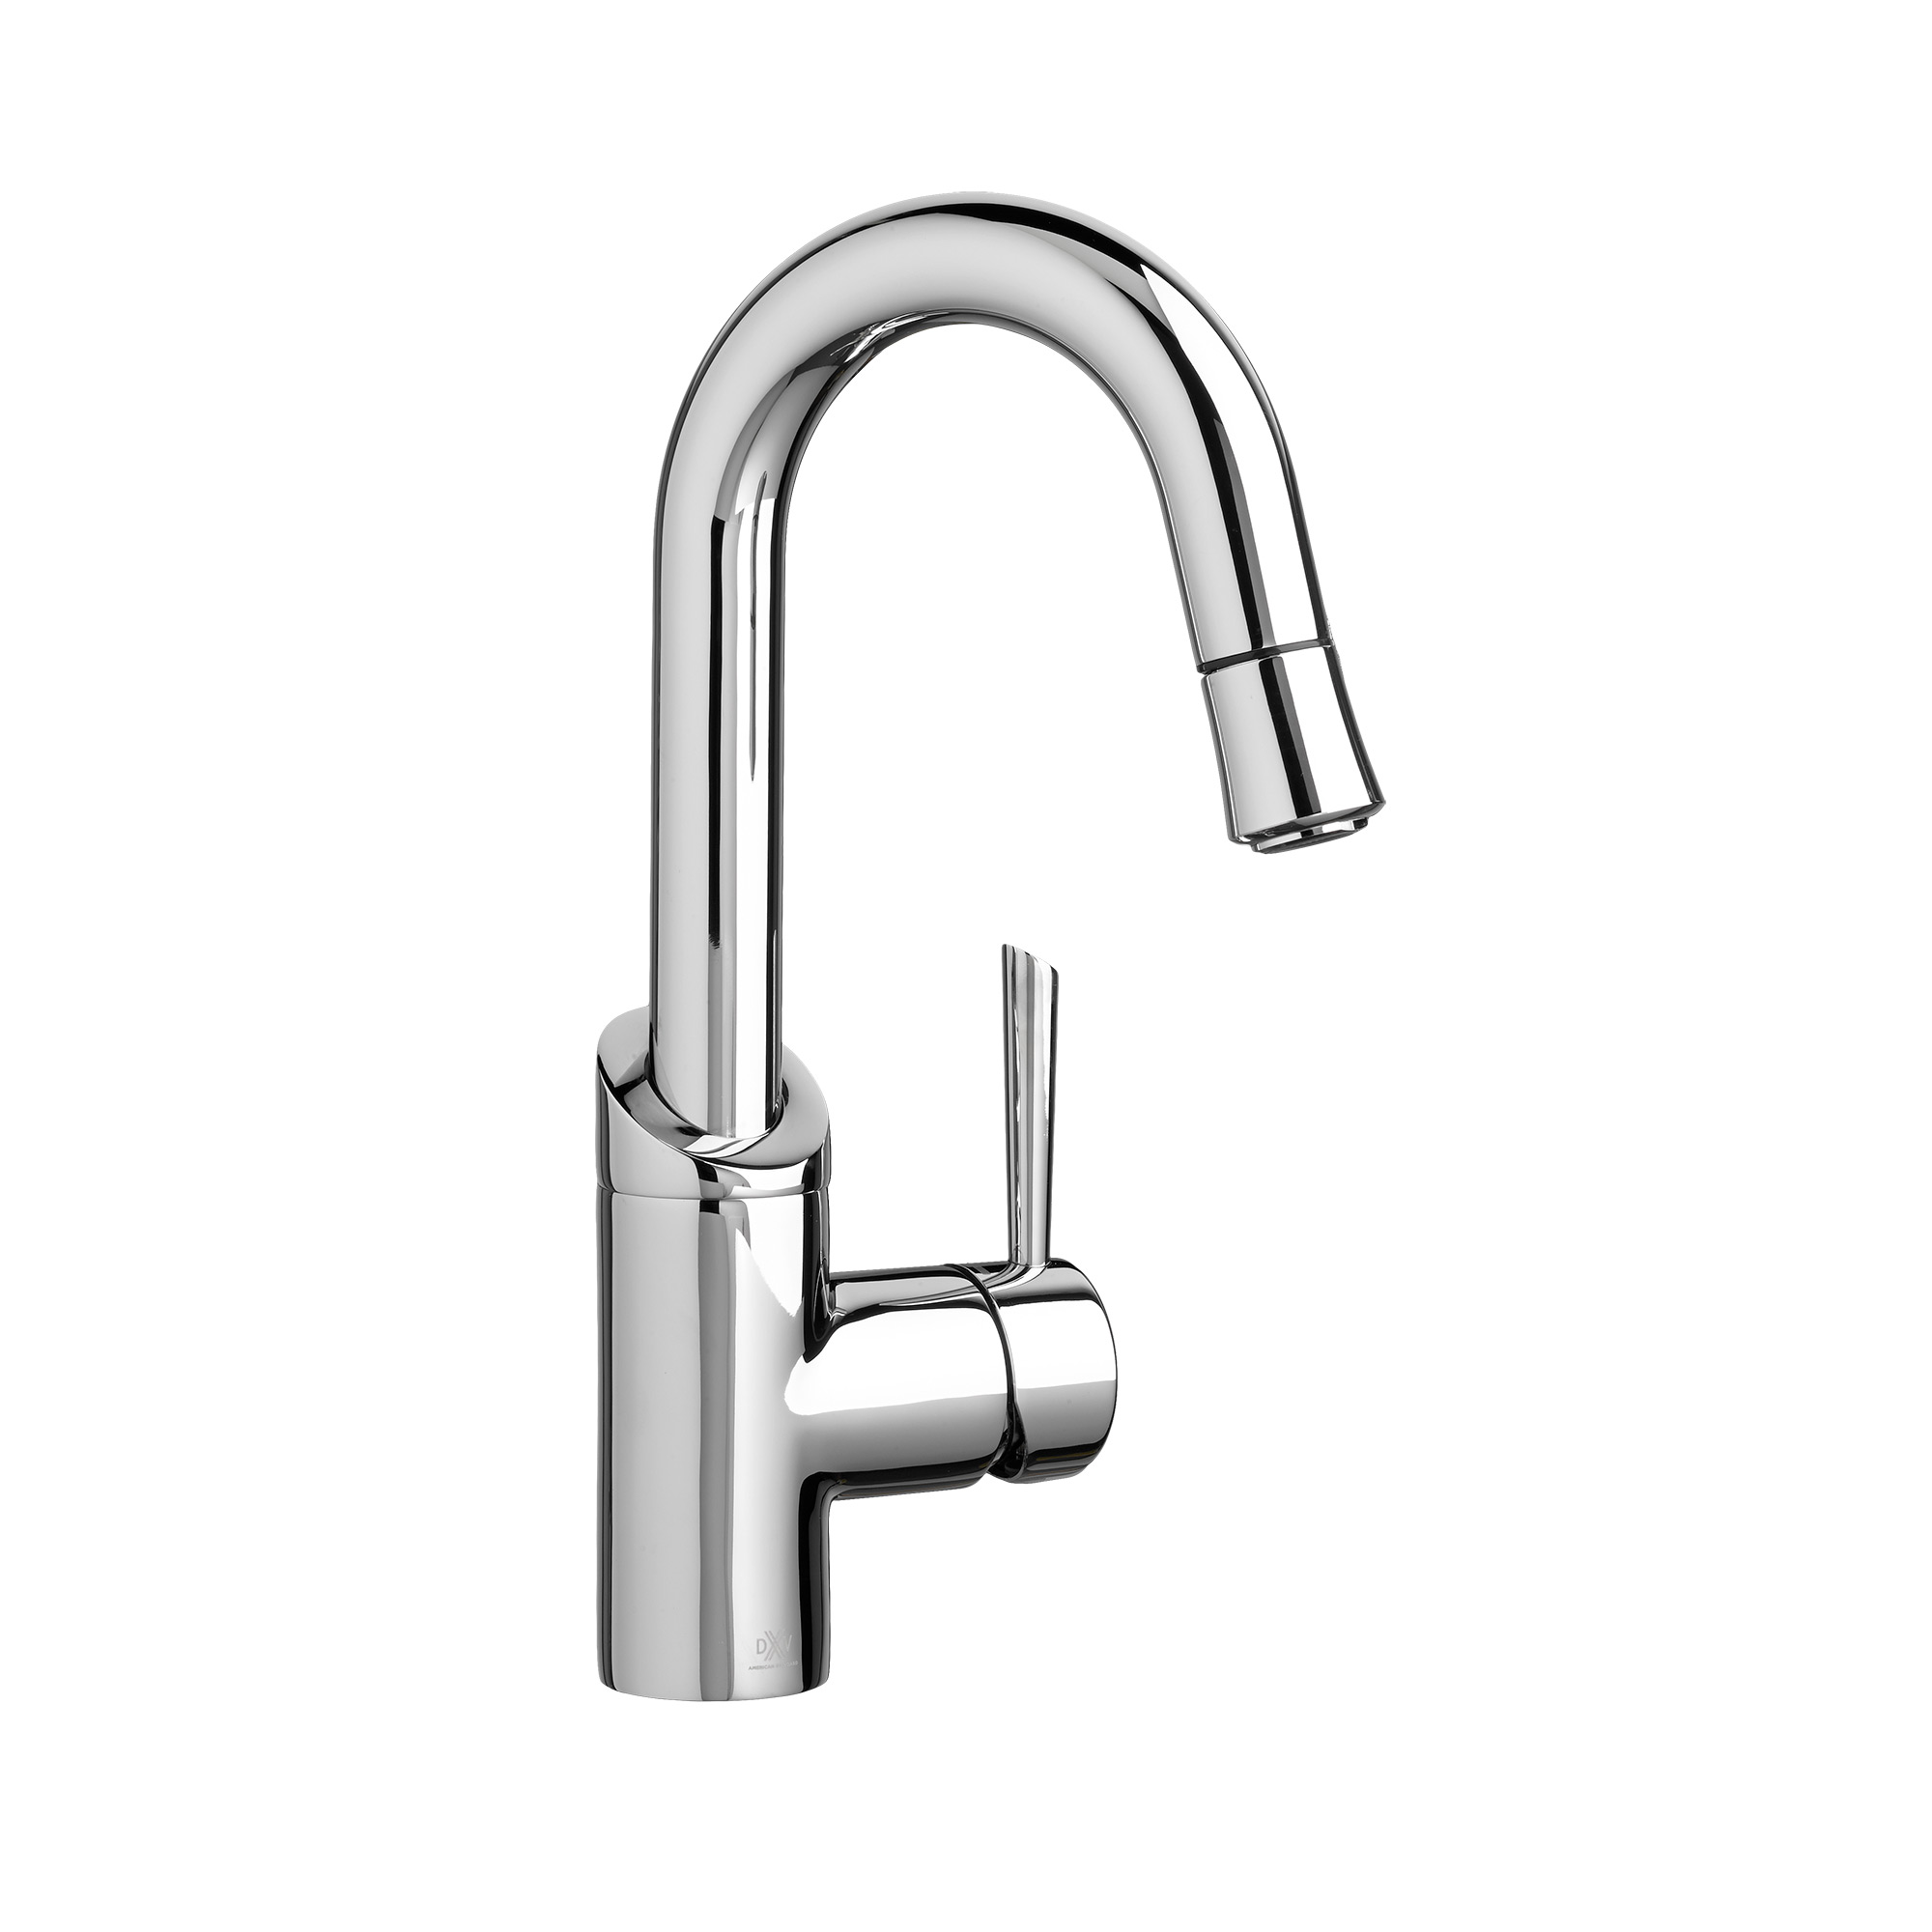 Fresno® Single Handle Bar Faucet with Lever Handle